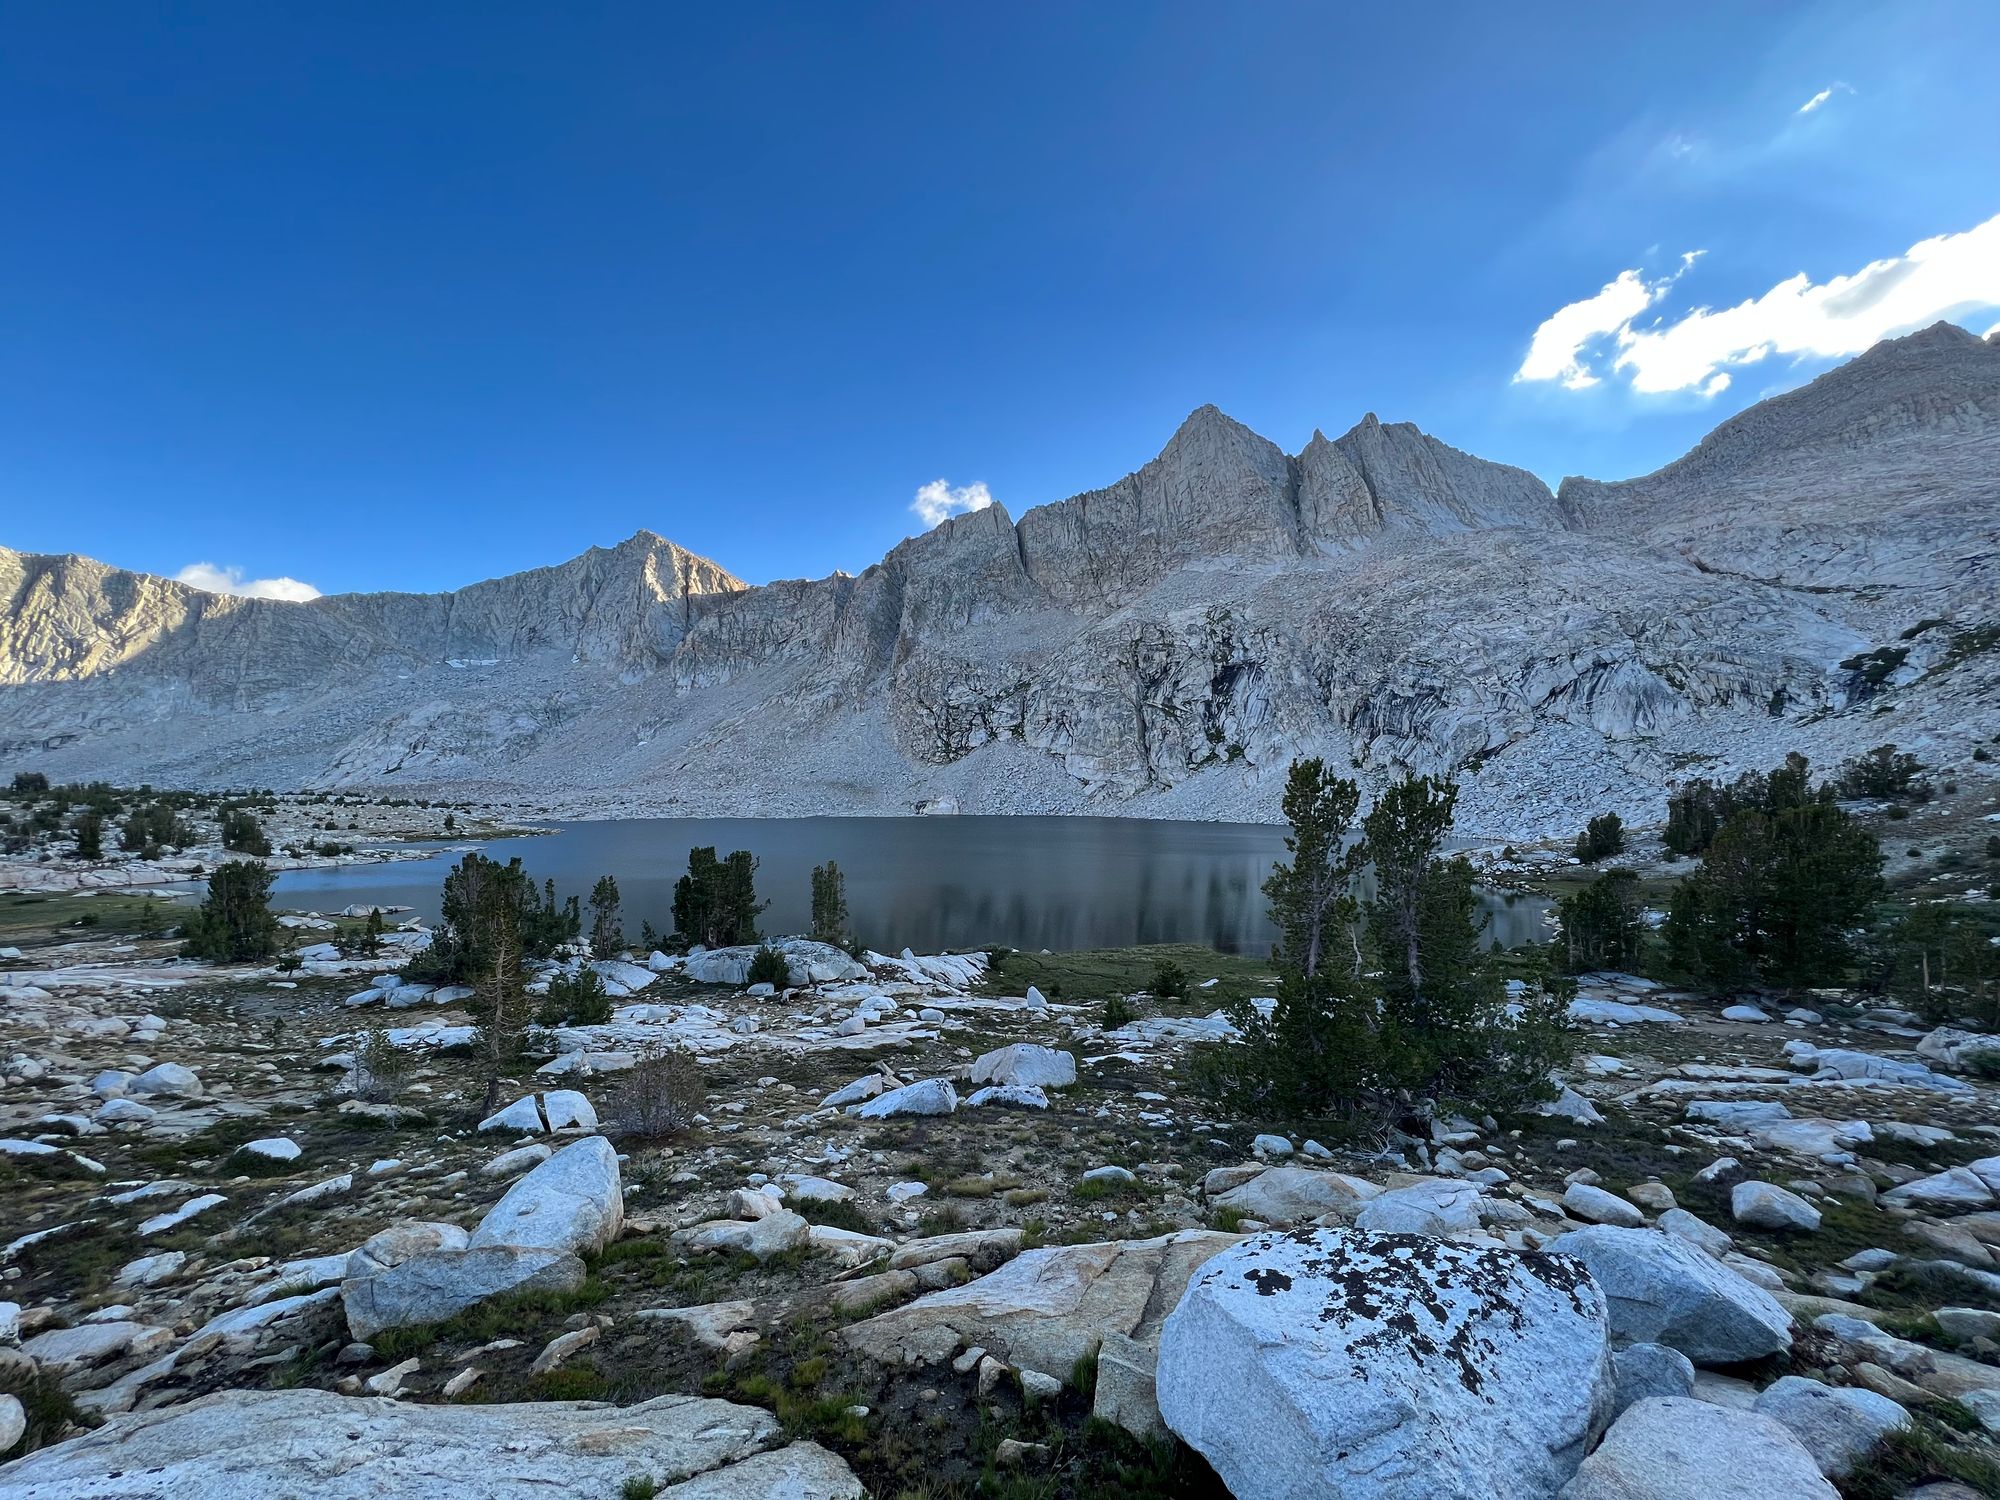 A large lake in front of a near-vertical granite mountain.